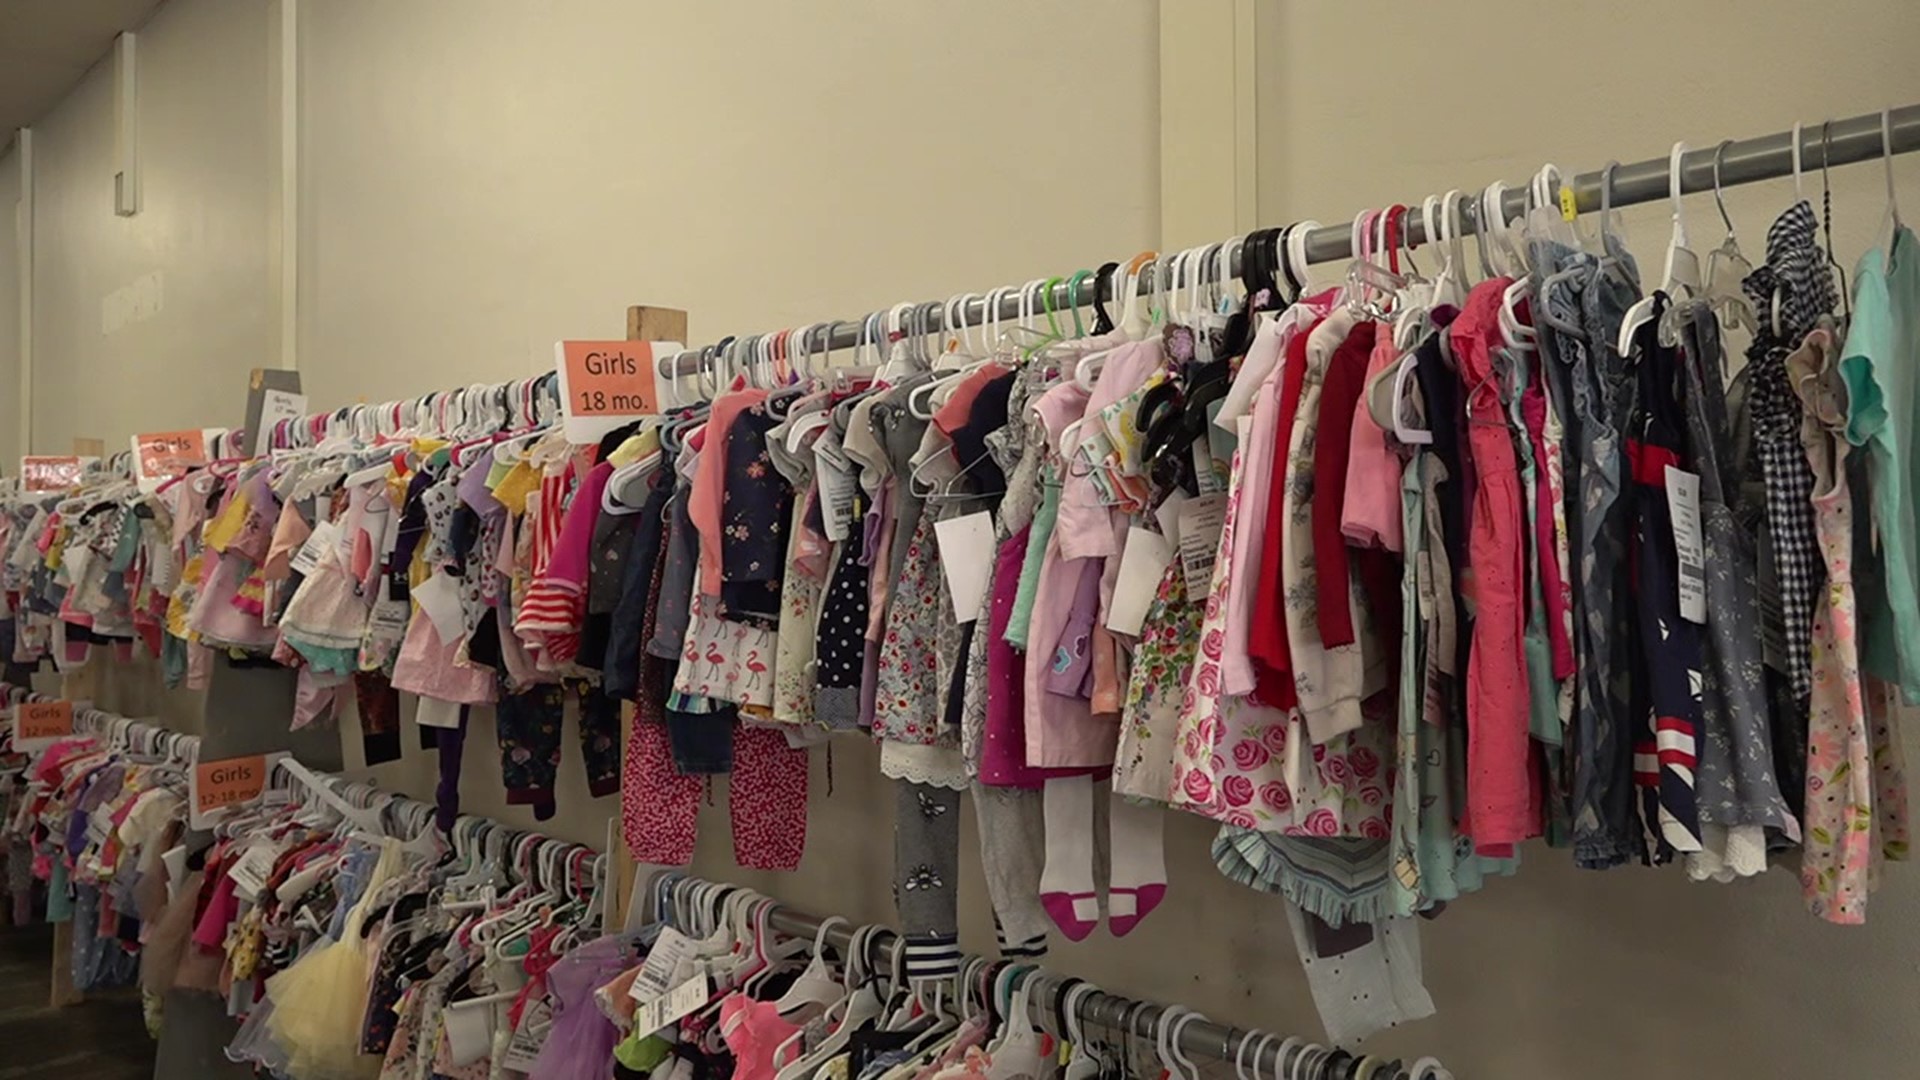 Newswatch 16's Mackenzie Aucker stopped by a pop-up consignment shop in Lycoming County that also helps women and their families.